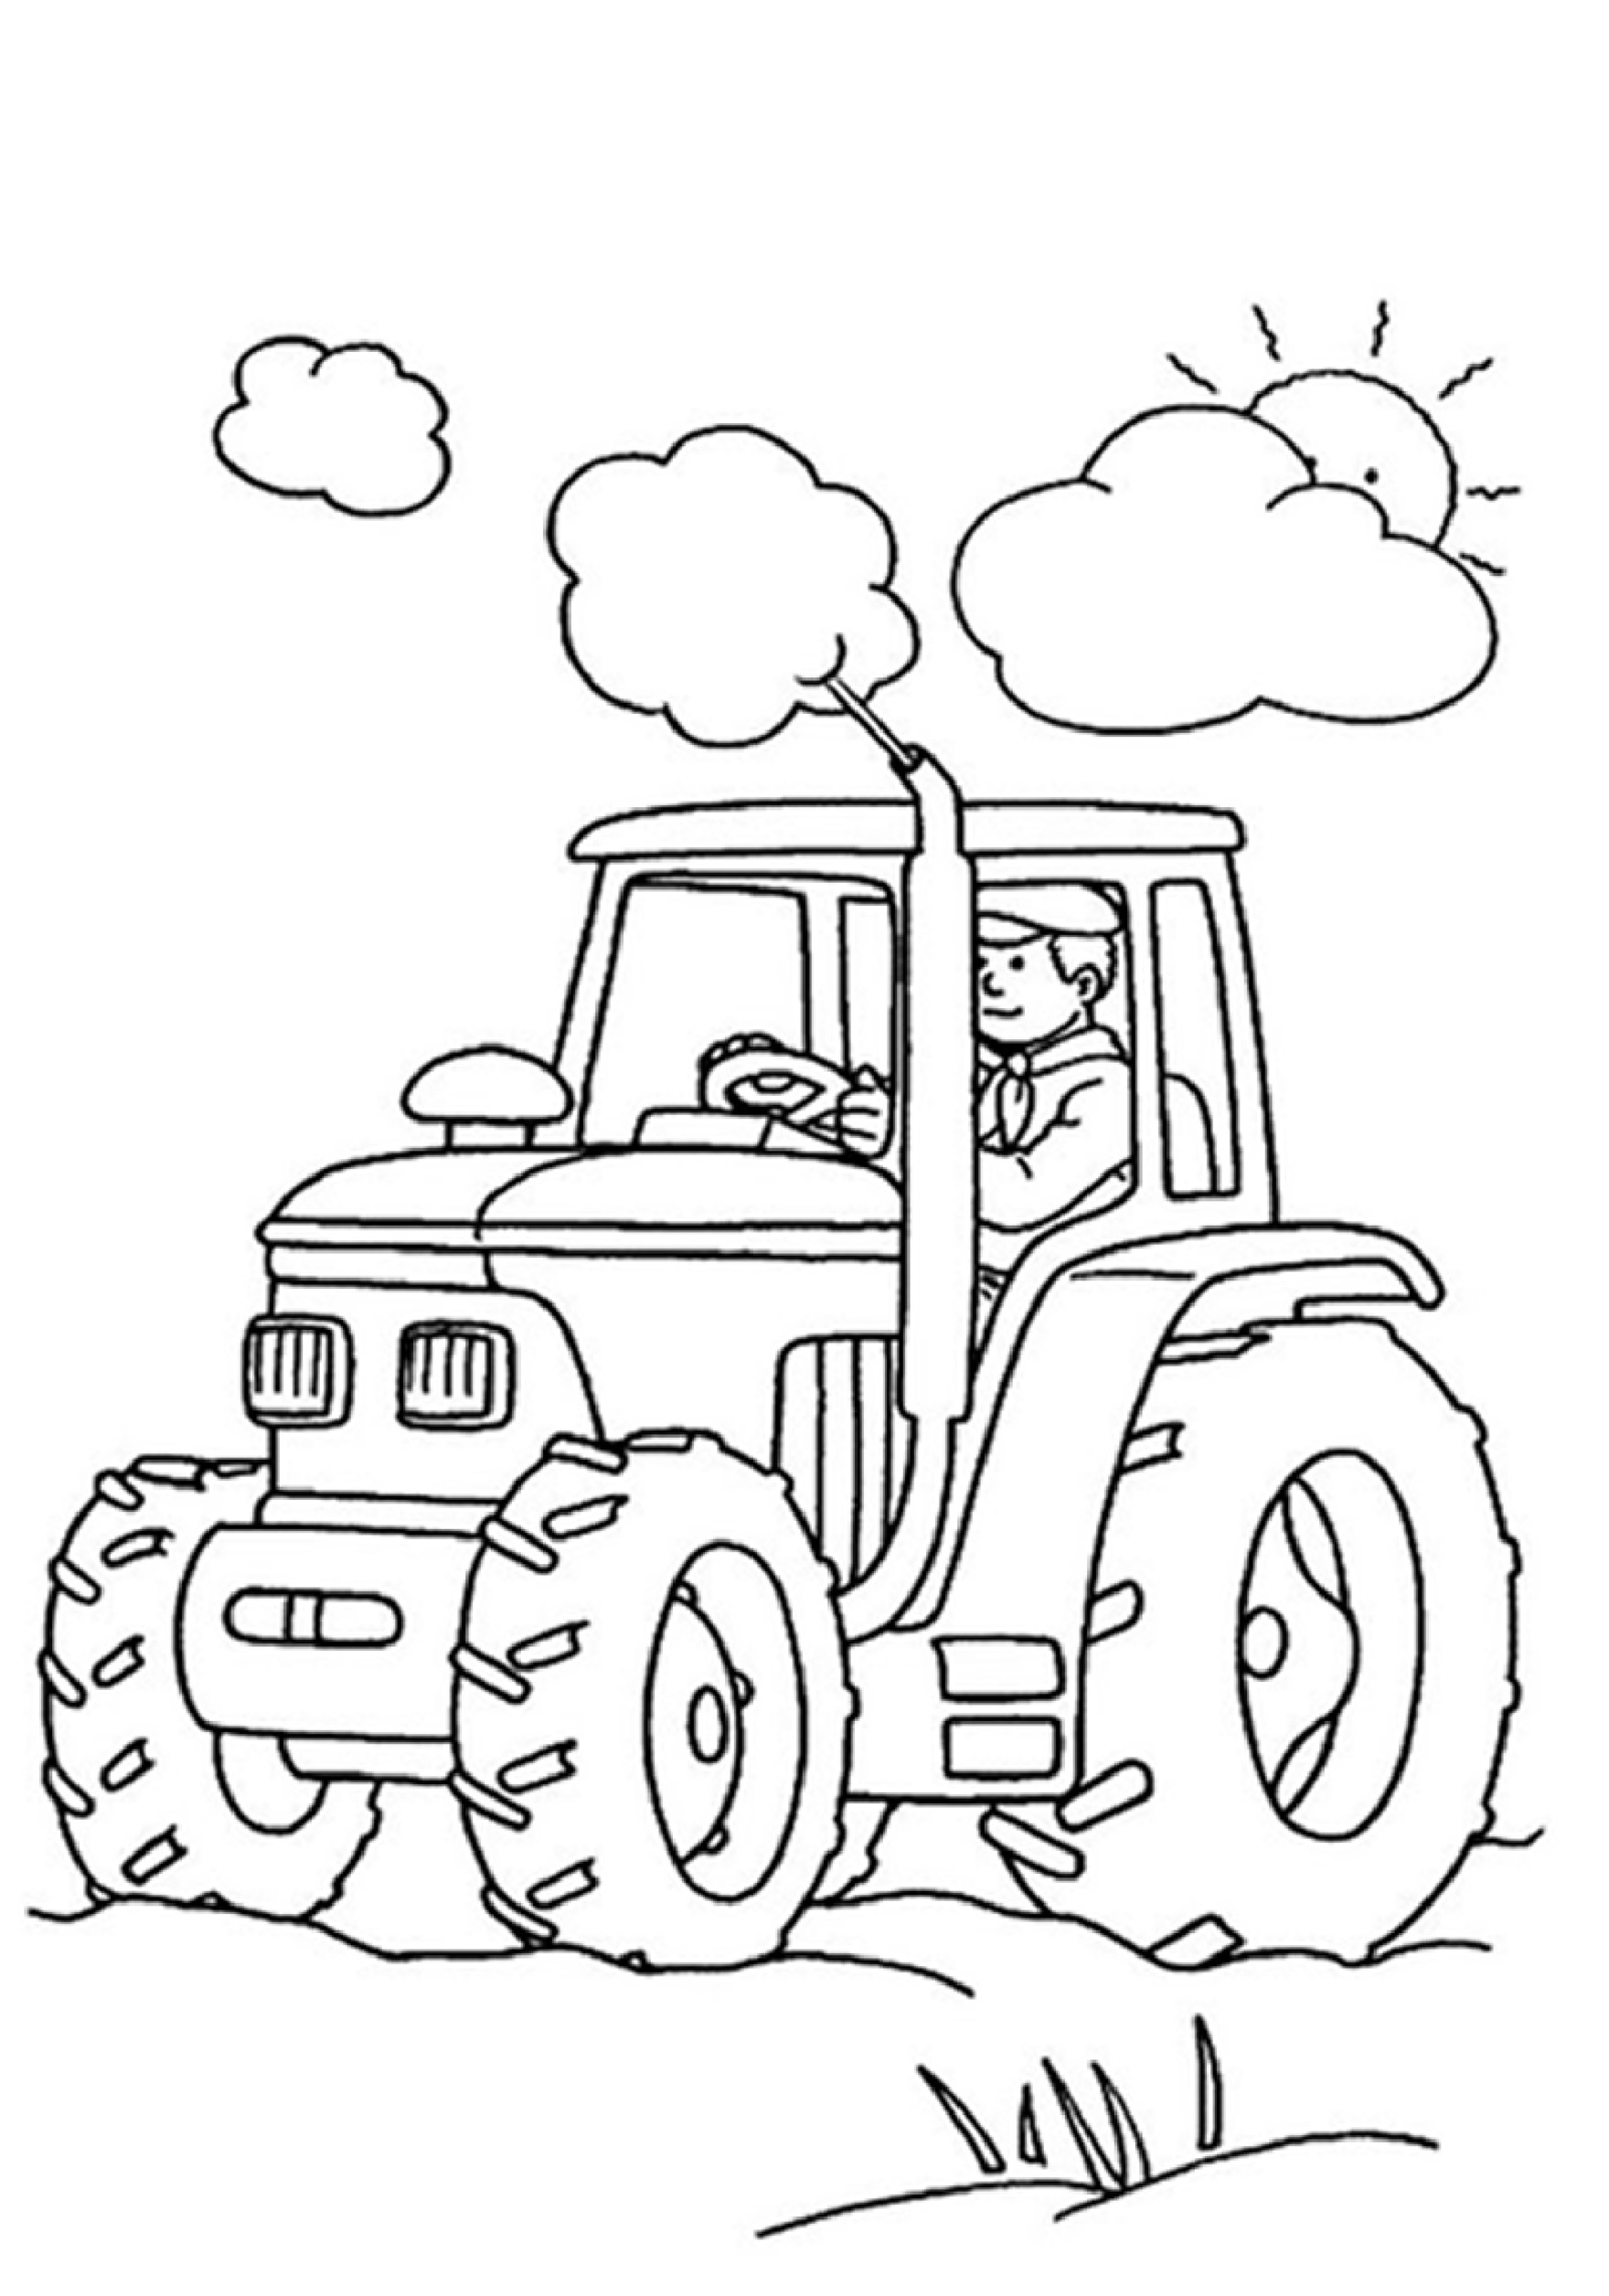 Free Printable Boys Coloring Pages
 Coloring pages for boys